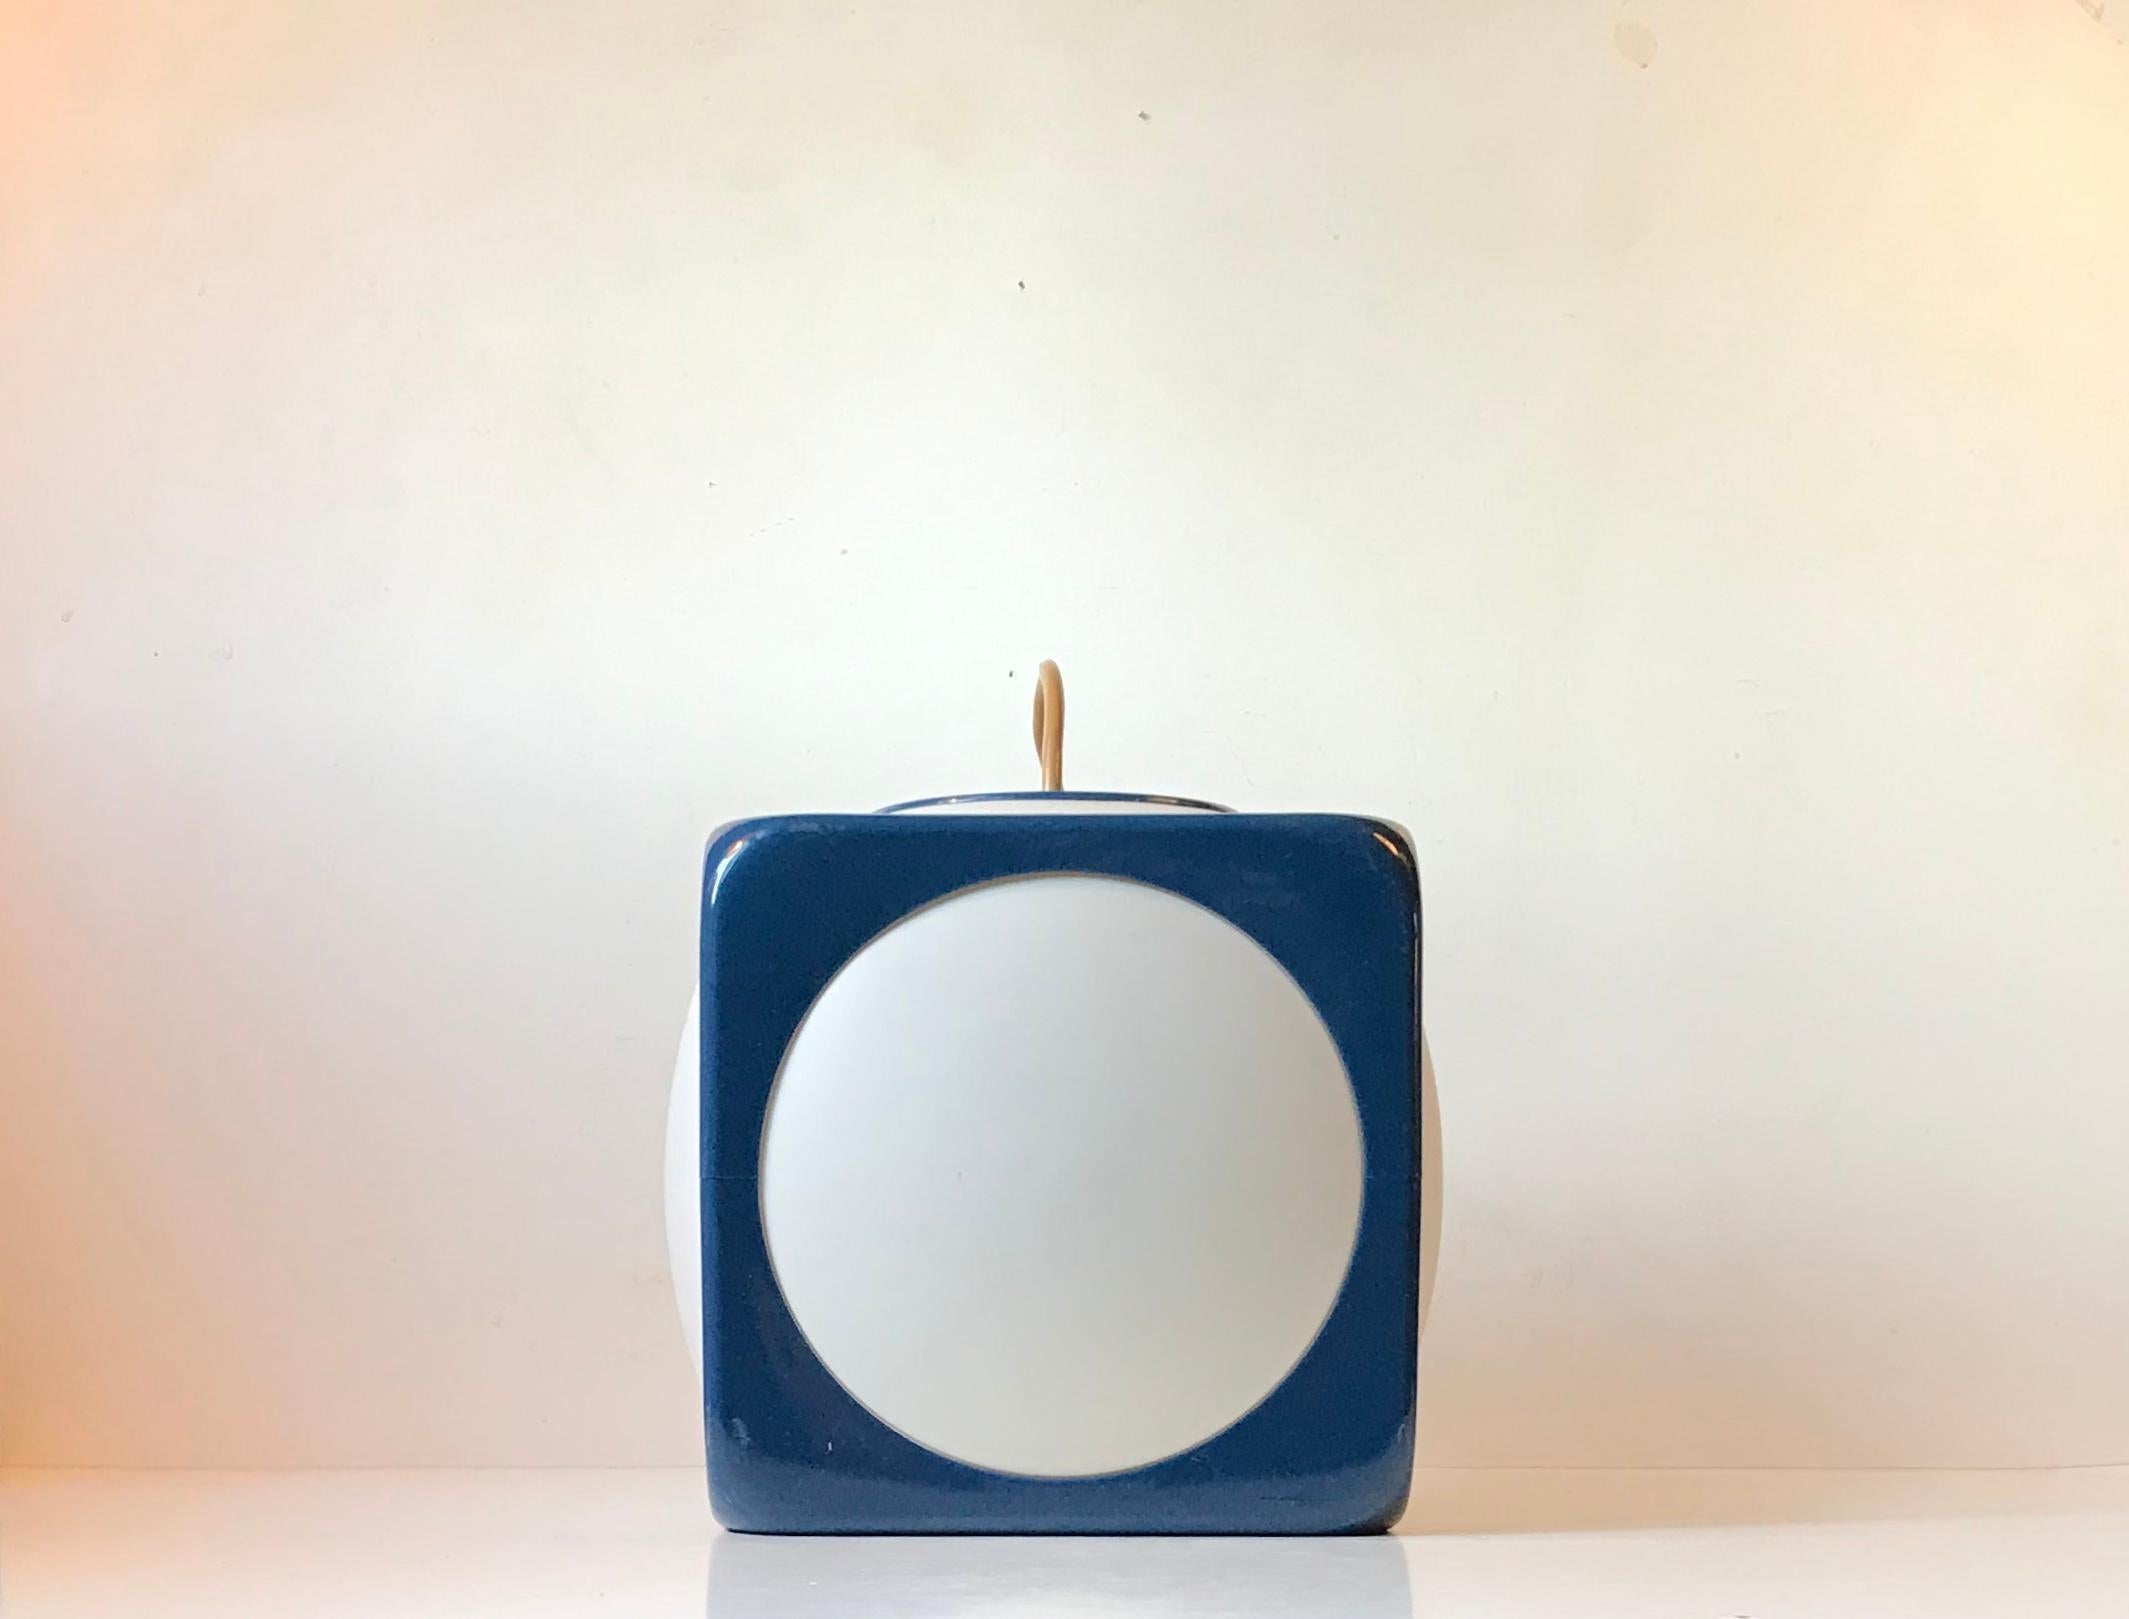 This light from danish Hoyrup Lamper was designed and manufactured during the 1970s. It is for obvious reasons called 'Dice' and is made from petrol blue acrylic and thin white lucite panels.